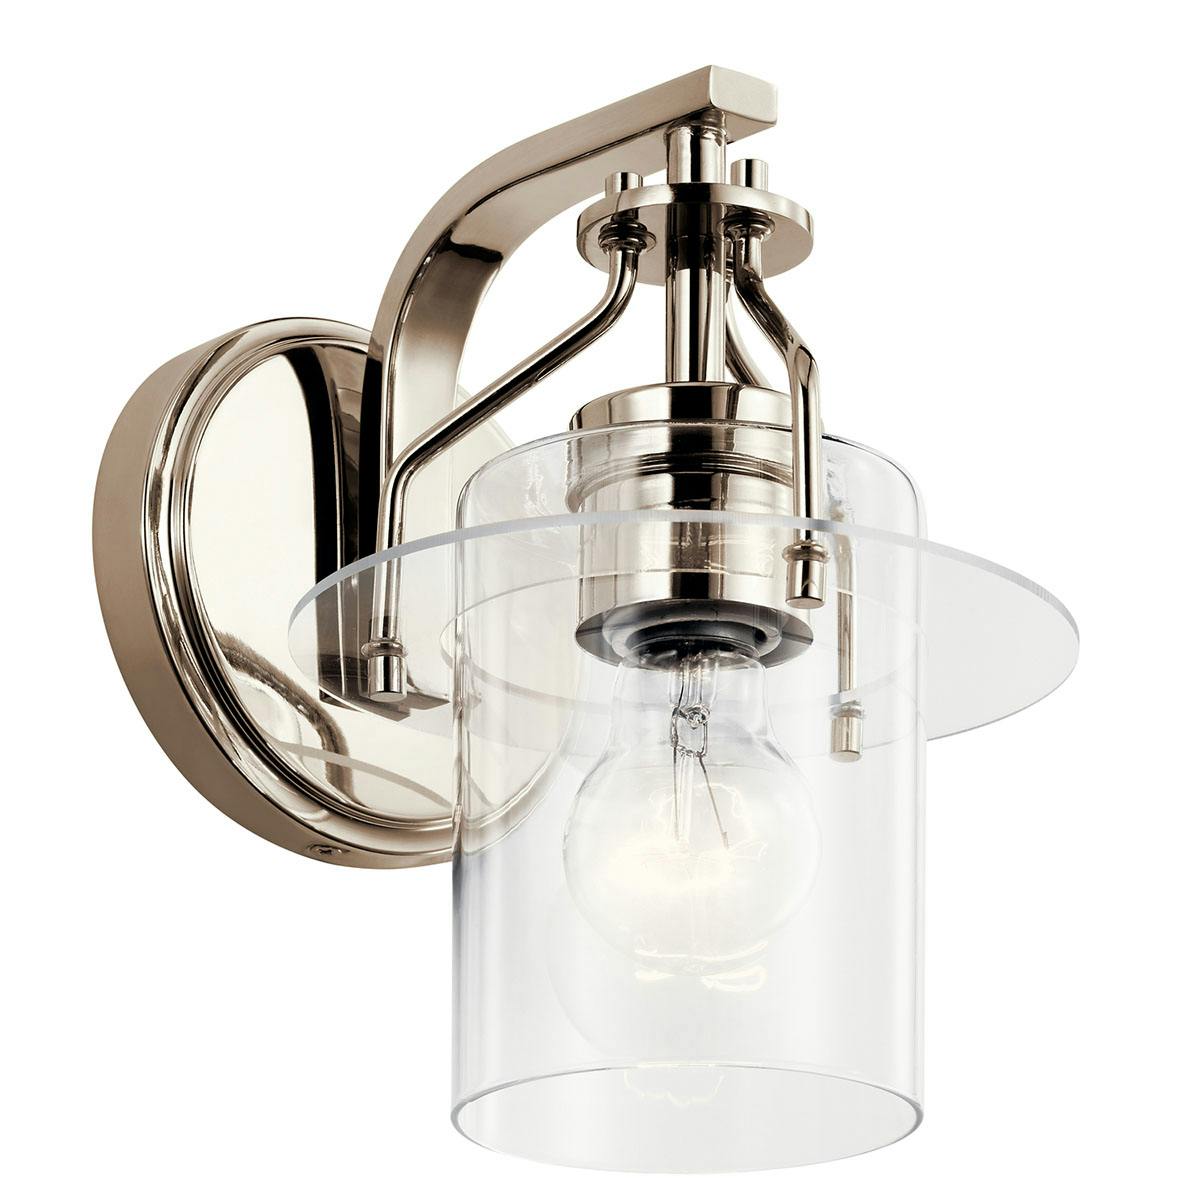 Everett 1 Light Sconce in Nickel on a white background